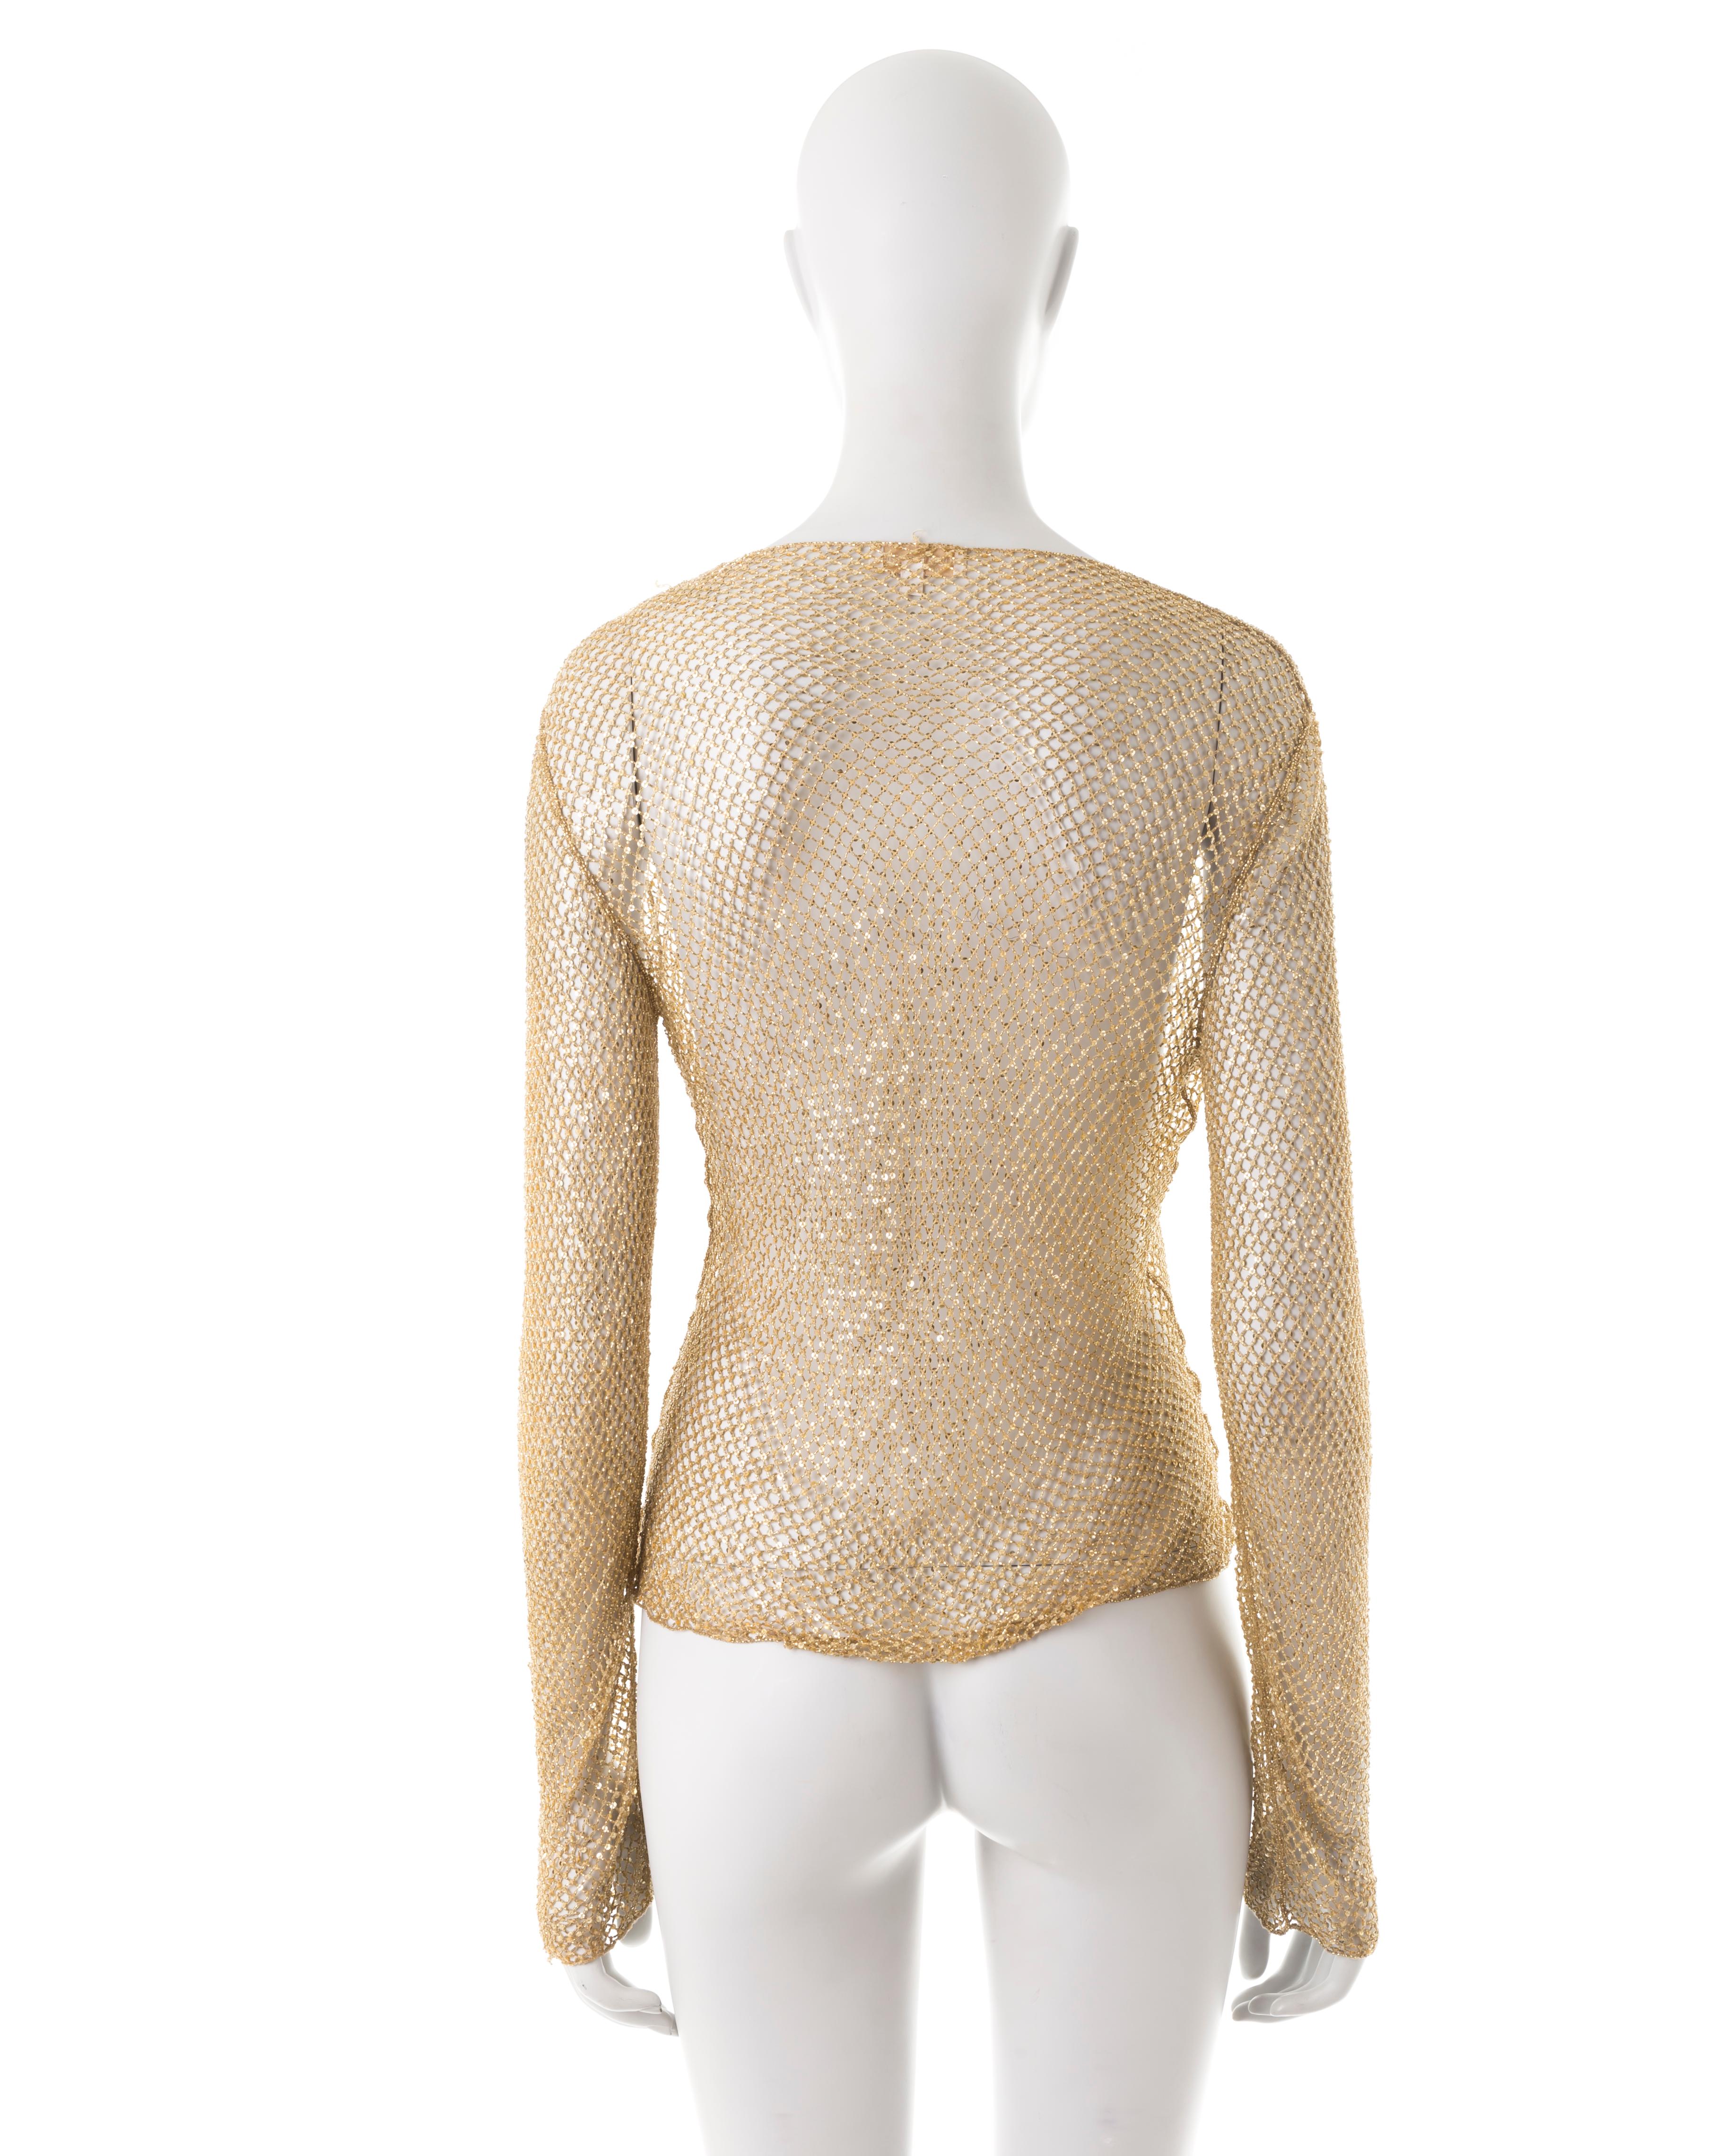 Roberto Cavalli S/S 1999 gold beaded fishnet cardigan In Excellent Condition For Sale In Rome, IT